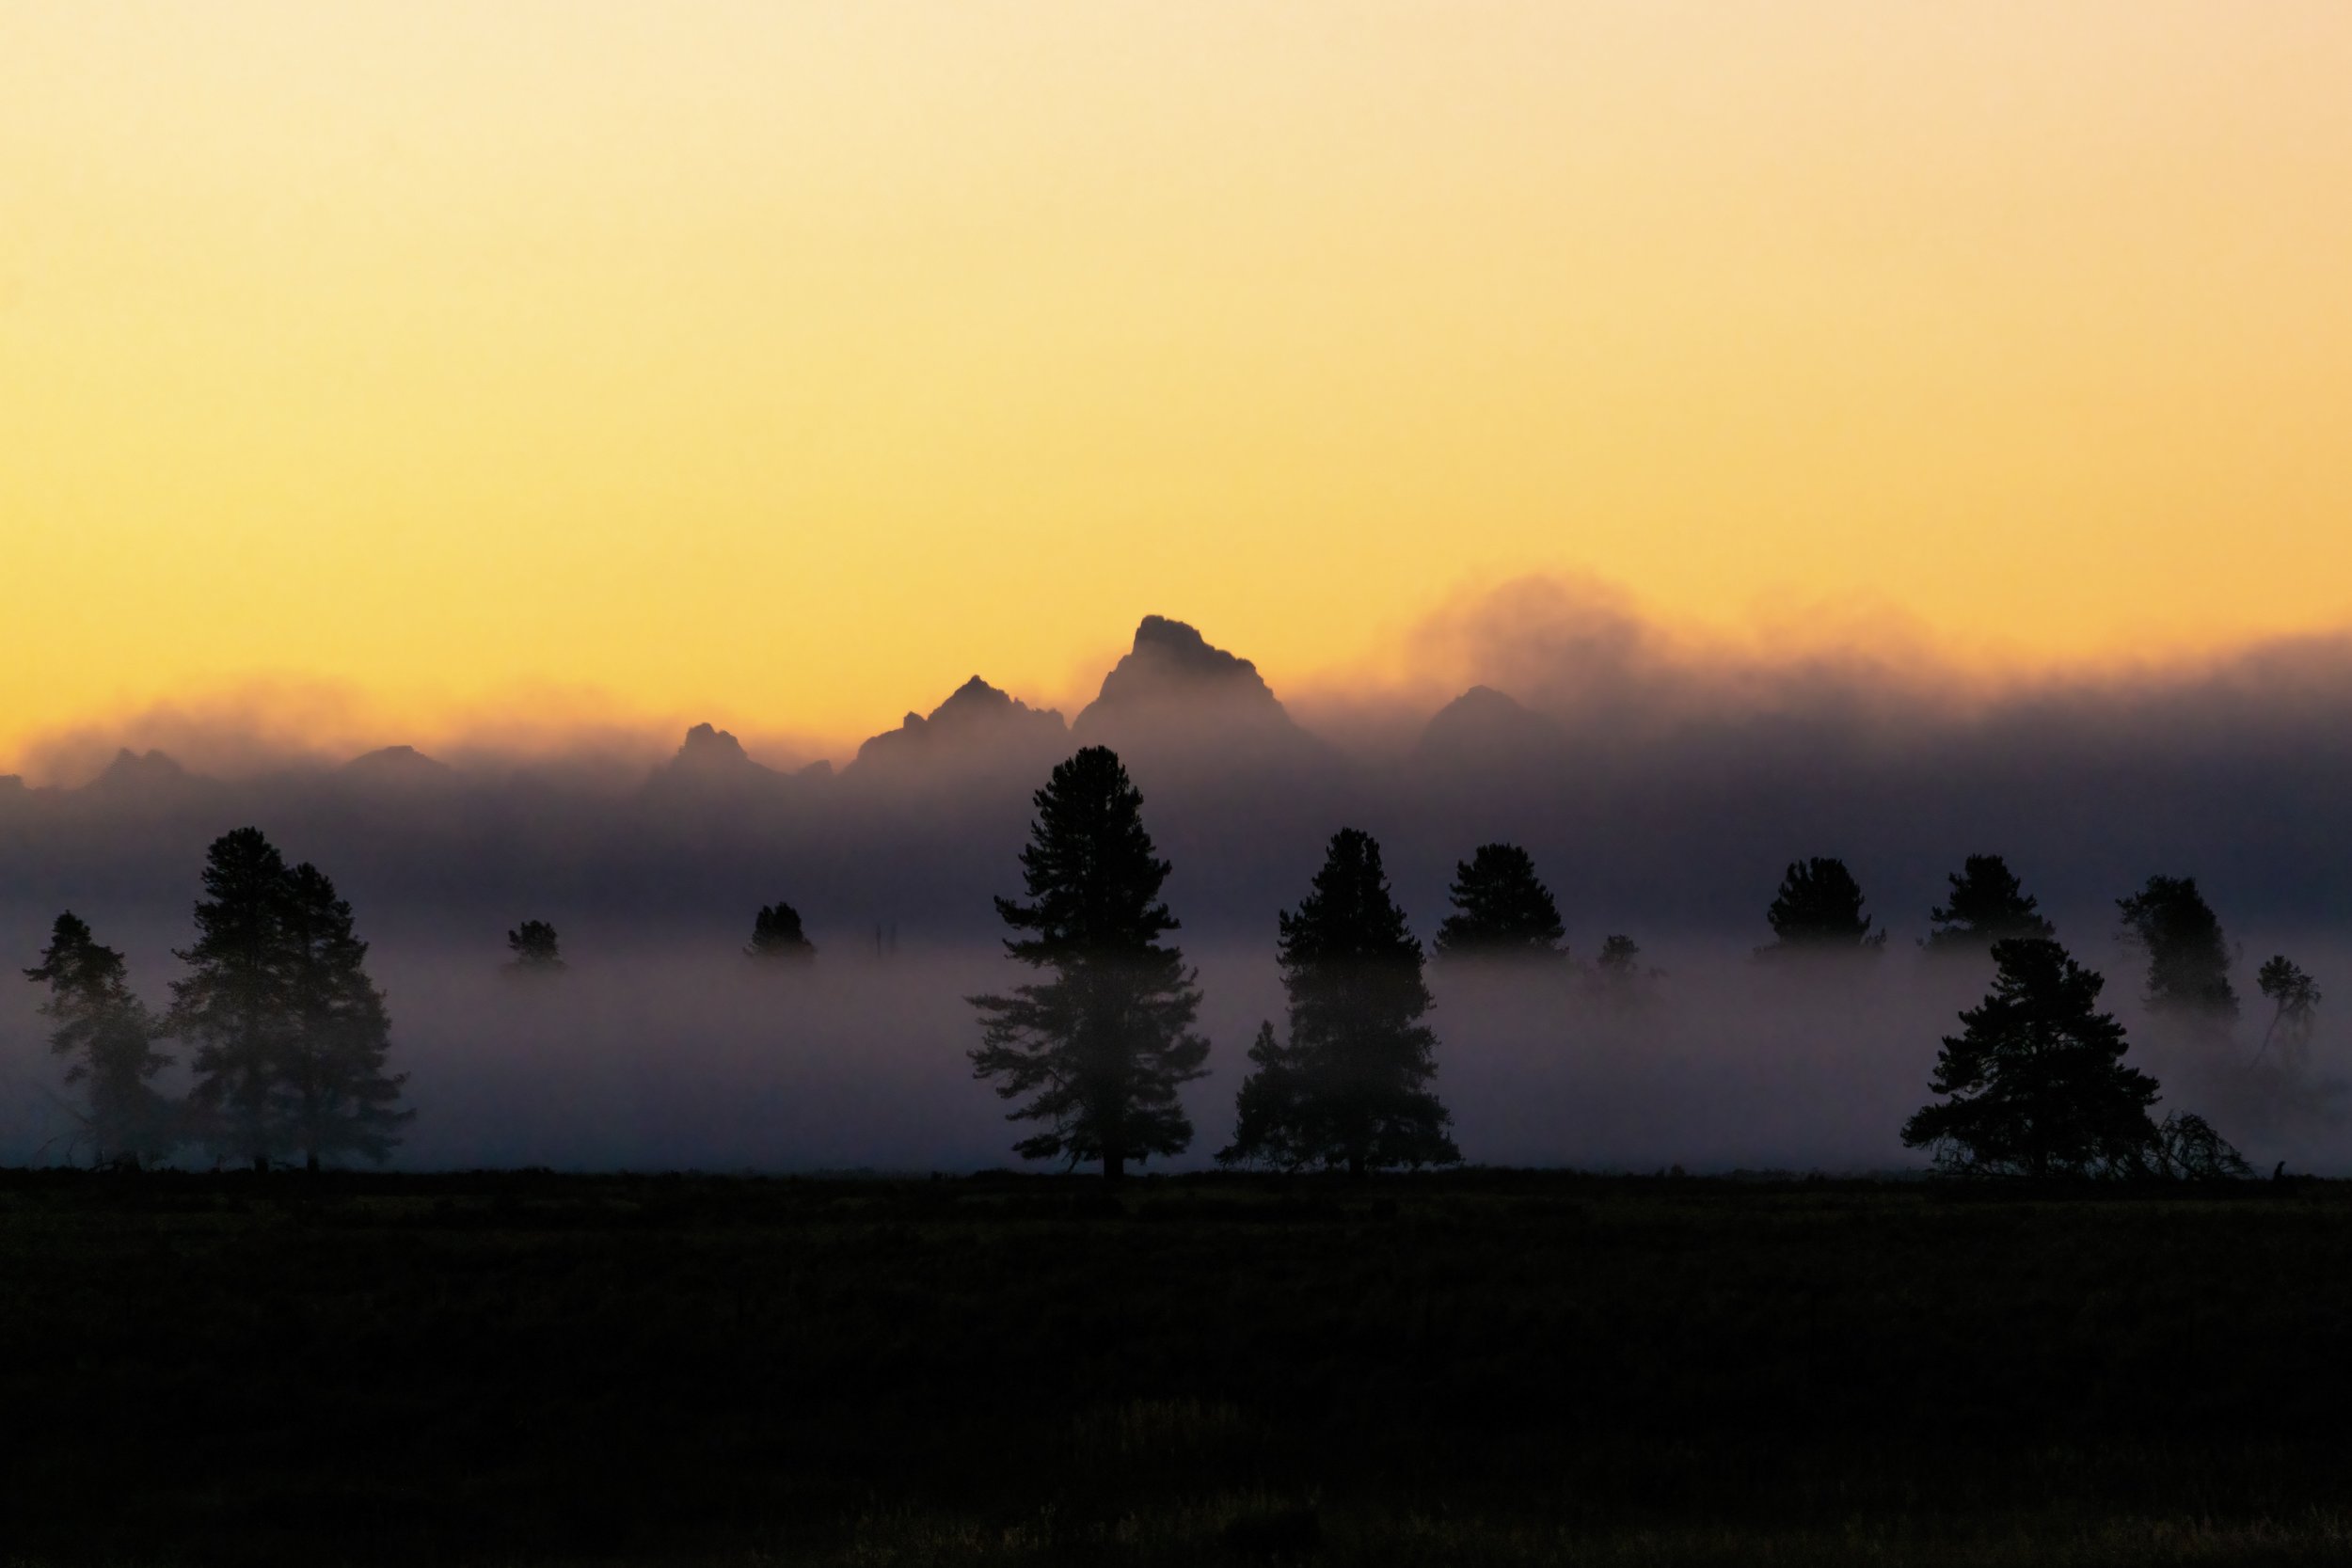 The Tetons above the mist.